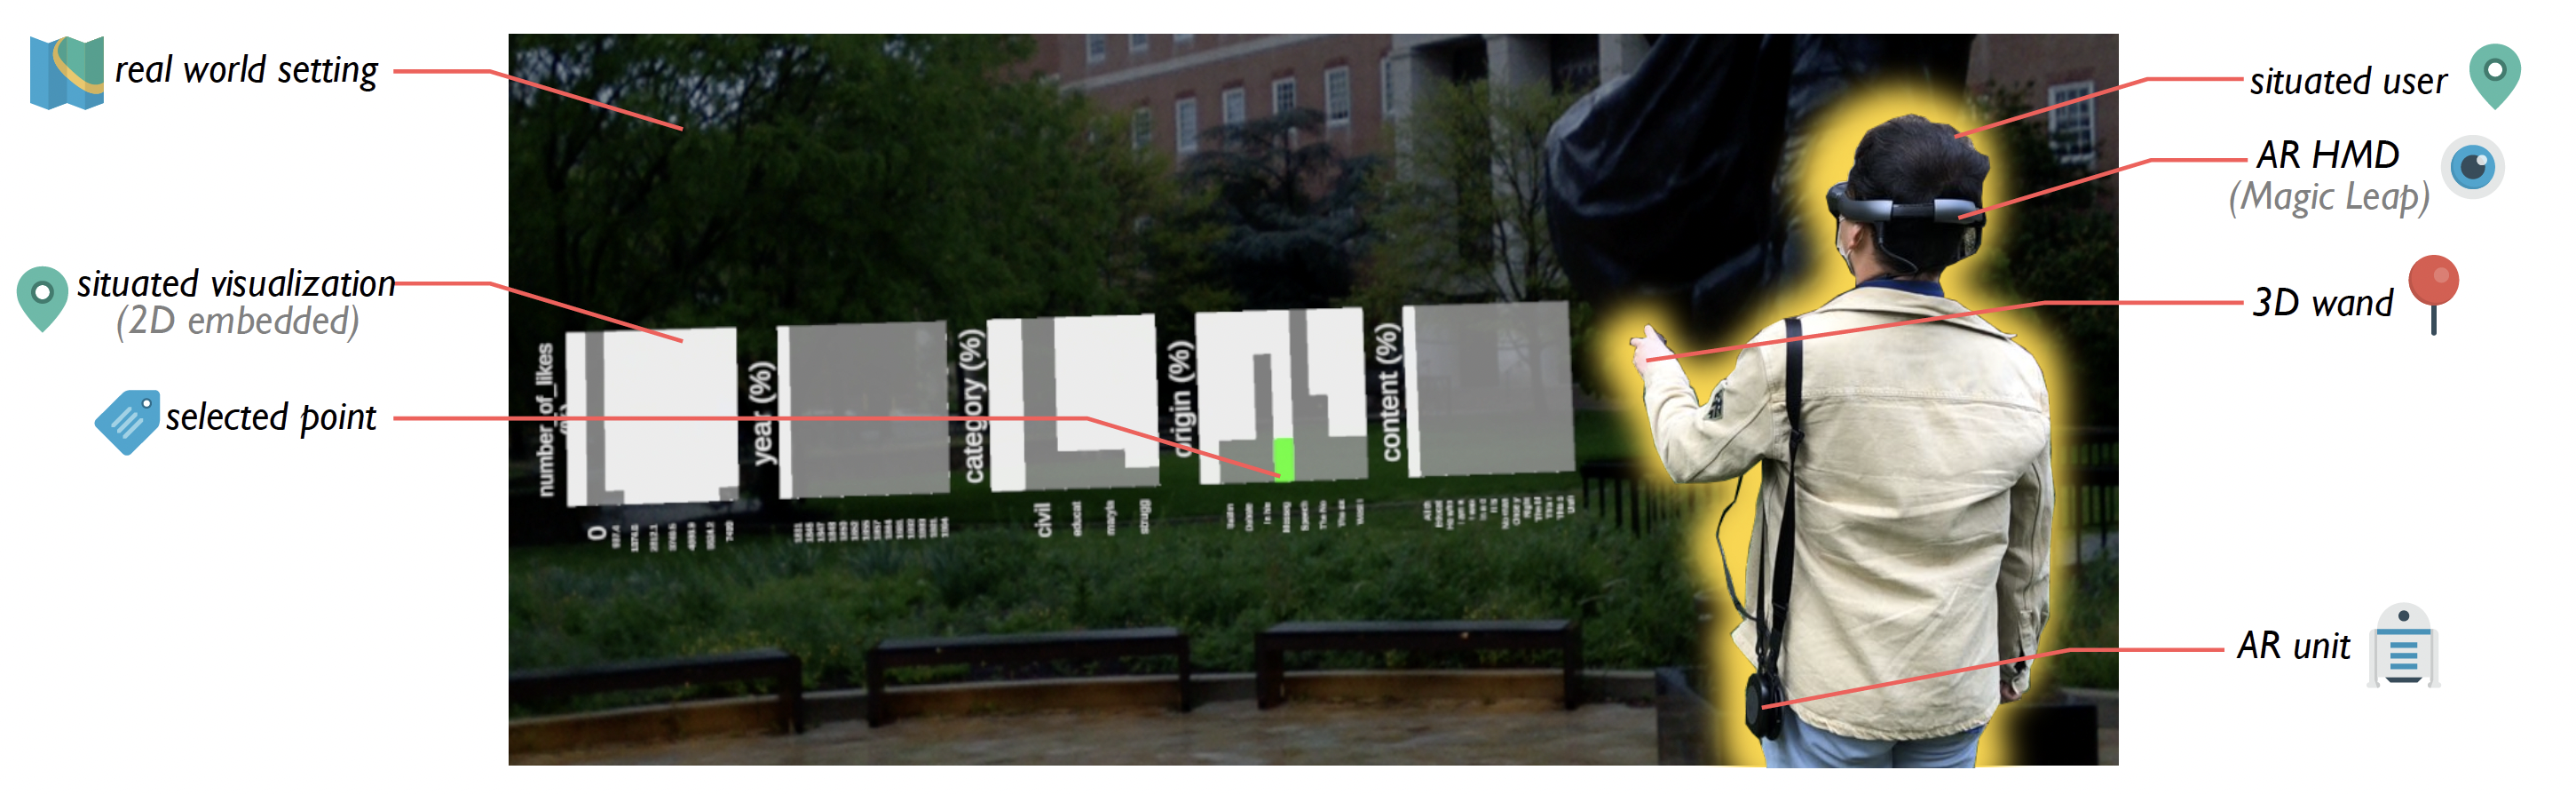 Example of a situated analytics tool that uses Augmented Reality to enable sensemaking in-situ